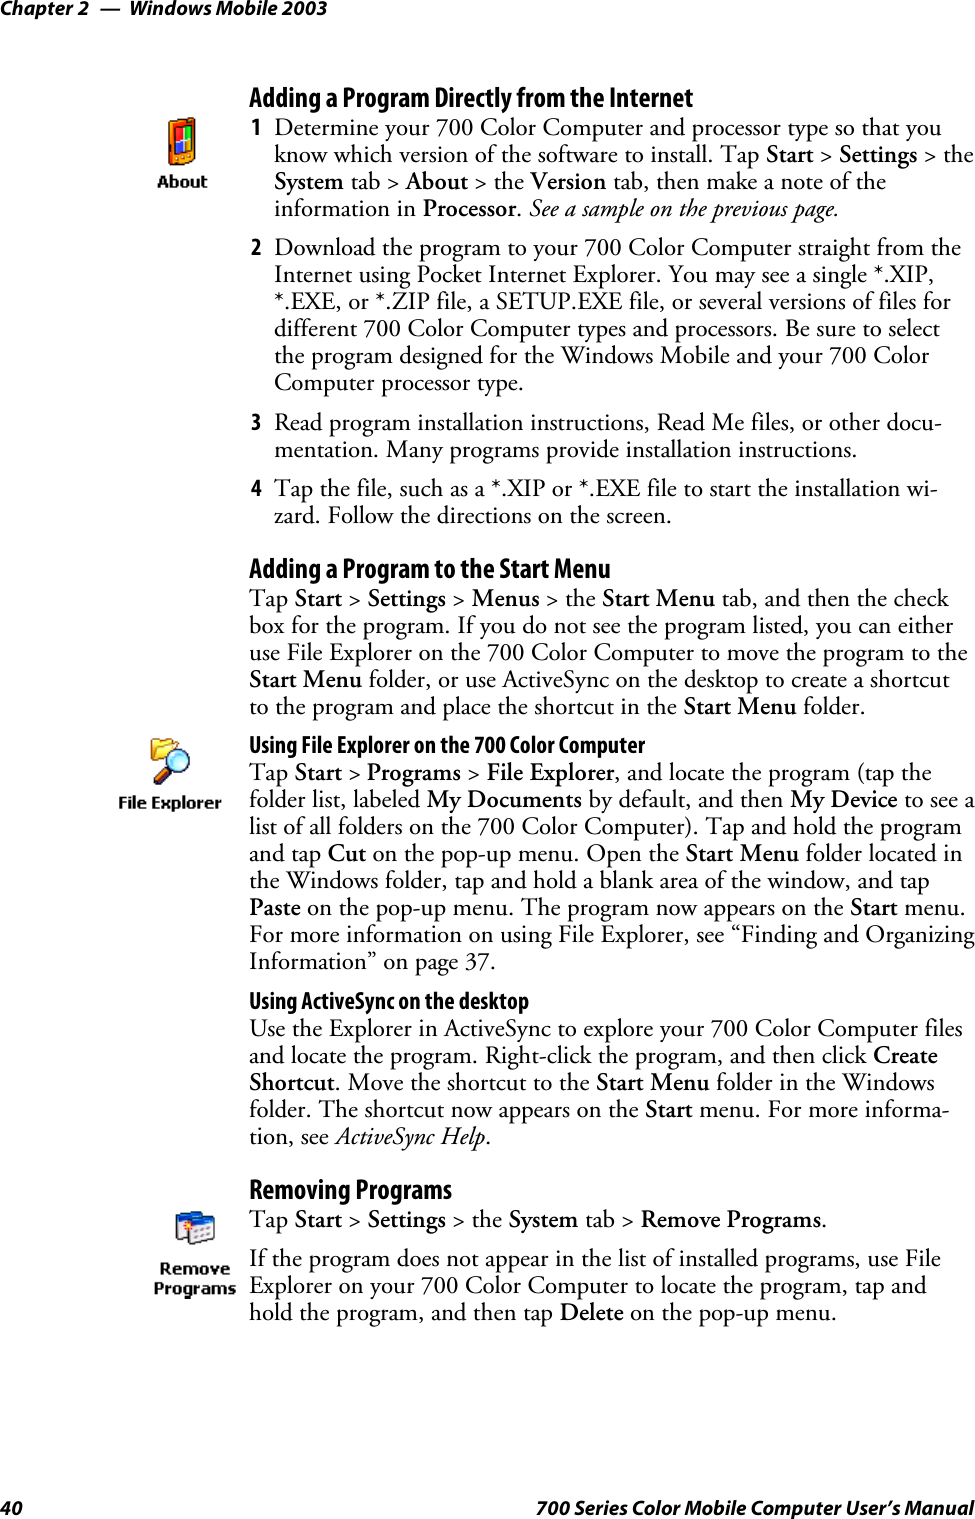 Windows Mobile 2003Chapter —240 700 Series Color Mobile Computer User’s ManualAdding a Program Directly from the Internet1Determine your 700 Color Computer and processor type so that youknow which version of the software to install. Tap Start &gt;Settings &gt;theSystem tab &gt; About &gt;theVersion tab, then make a note of theinformation in Processor.See a sample on the previous page.2Download the program to your 700 Color Computer straight from theInternet using Pocket Internet Explorer. You may see a single *.XIP,*.EXE, or *.ZIP file, a SETUP.EXE file, or several versions of files fordifferent 700 Color Computer types and processors. Be sure to selectthe program designed for the Windows Mobile and your 700 ColorComputer processor type.3Read program installation instructions, Read Me files, or other docu-mentation. Many programs provide installation instructions.4Tap the file, such as a *.XIP or *.EXE file to start the installation wi-zard. Follow the directions on the screen.Adding a Program to the Start MenuTap Start &gt;Settings &gt;Menus &gt;theStart Menu tab, and then the checkbox for the program. If you do not see the program listed, you can eitheruse File Explorer on the 700 Color Computer to move the program to theStart Menu folder, or use ActiveSync on the desktop to create a shortcutto the program and place the shortcut in the Start Menu folder.Using File Explorer on the 700 Color ComputerTap Start &gt;Programs &gt;File Explorer, and locate the program (tap thefolder list, labeled My Documents by default, and then My Device to see alist of all folders on the 700 Color Computer). Tap and hold the programand tap Cut on the pop-up menu. Open the Start Menu folder located inthe Windows folder, tap and hold a blank area of the window, and tapPaste on the pop-up menu. The program now appears on the Start menu.For more information on using File Explorer, see “Finding and OrganizingInformation” on page 37.Using ActiveSync on the desktopUse the Explorer in ActiveSync to explore your 700 Color Computer filesand locate the program. Right-click the program, and then click CreateShortcut. Move the shortcut to the Start Menu folder in the Windowsfolder. The shortcut now appears on the Start menu. For more informa-tion, see ActiveSync Help.Removing ProgramsTap Start &gt;Settings &gt;theSystem tab &gt; Remove Programs.If the program does not appear in the list of installed programs, use FileExplorer on your 700 Color Computer to locate the program, tap andhold the program, and then tap Delete on the pop-up menu.